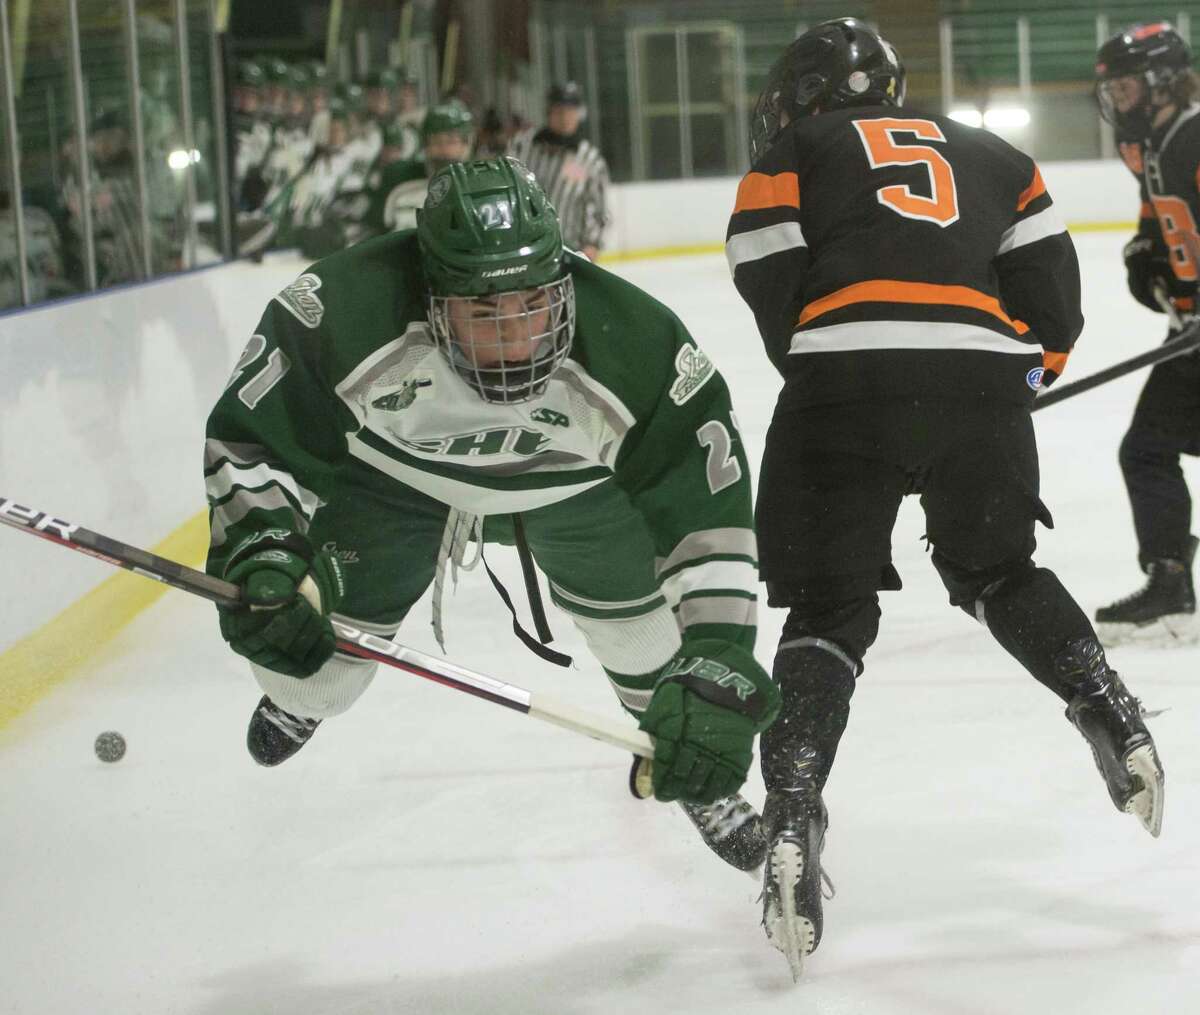 Shenendehowa forward Nolan Sullivan, left, and Bethlehem forward William Bievenue collide during a game in January. Sullivan is the Athlete of the Year and Bievenue is a first-team member.